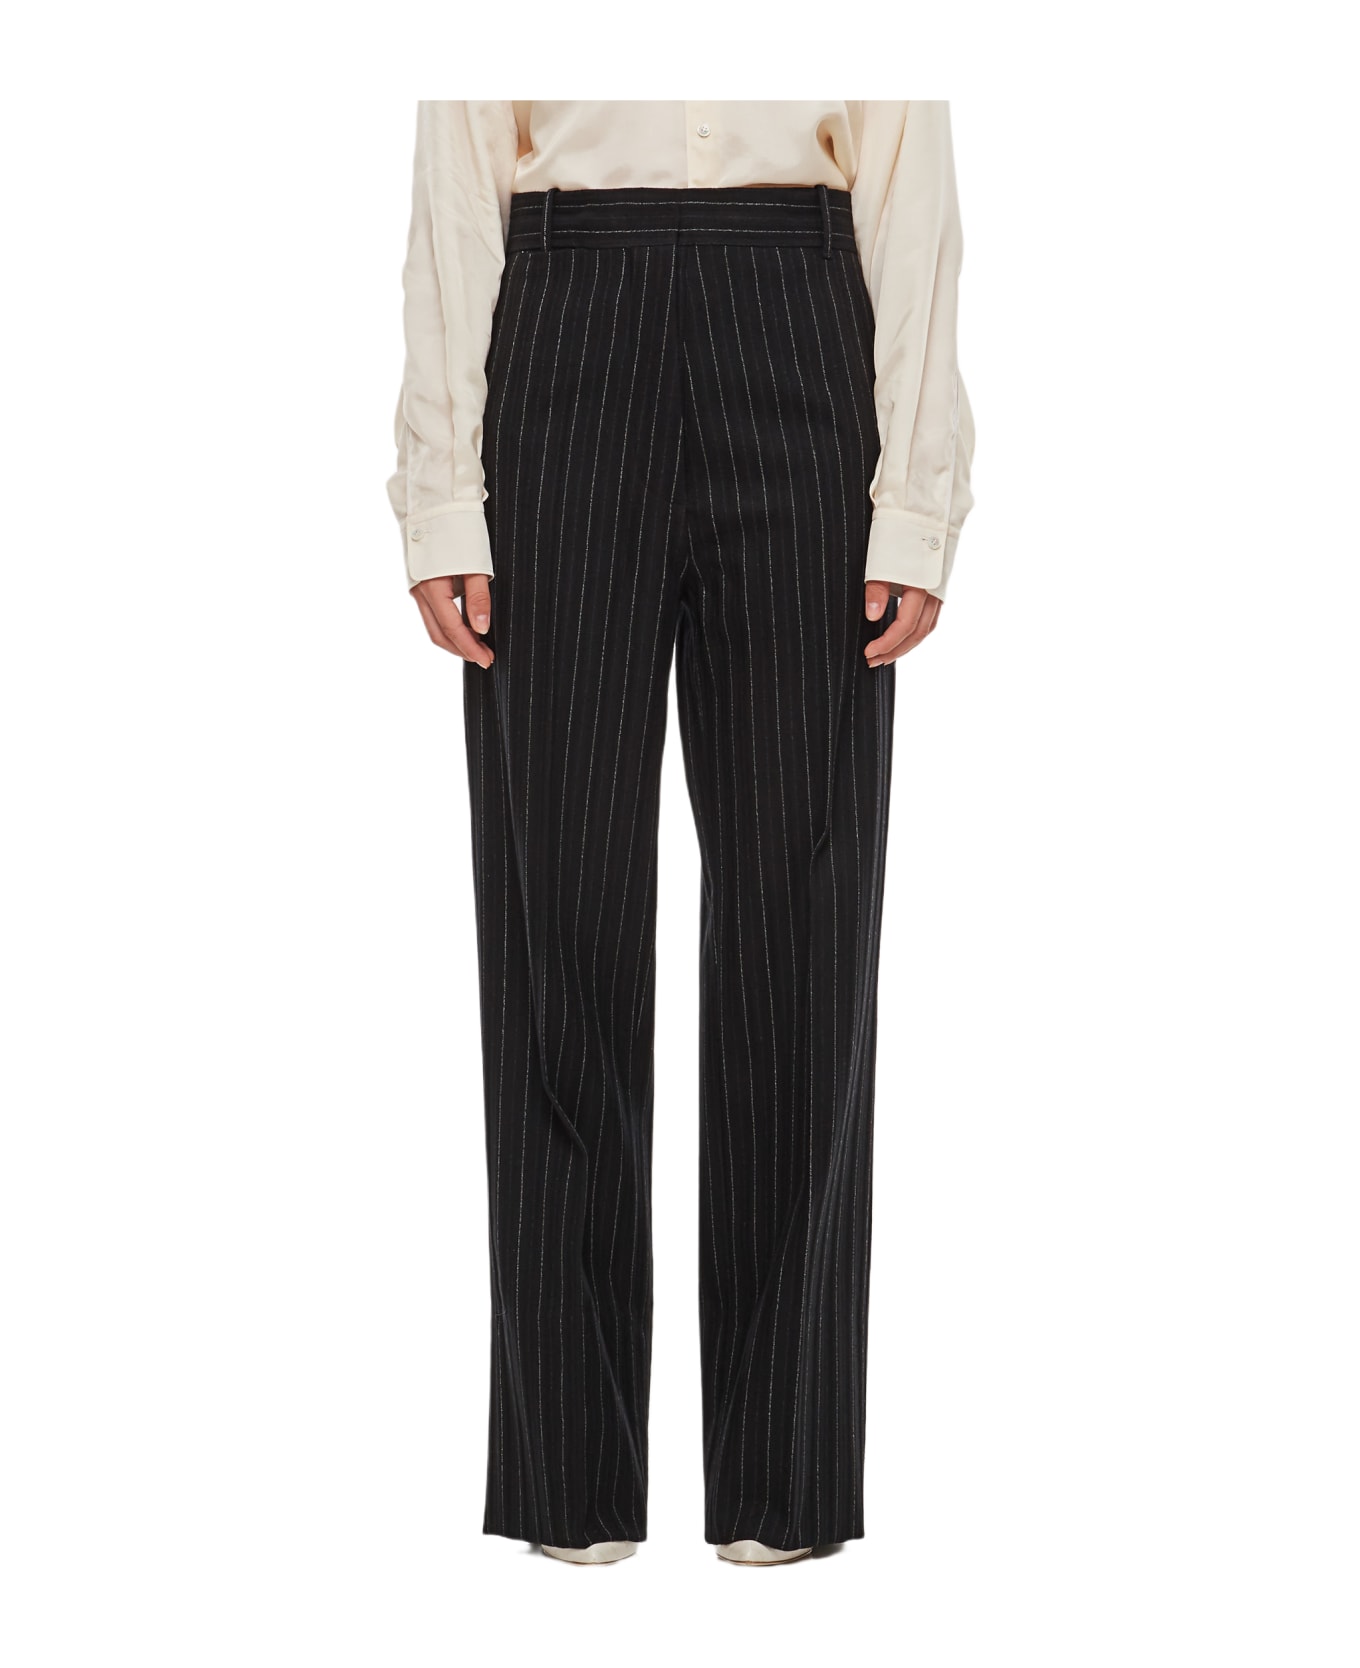 Quira Wool Suit Trousers - Black